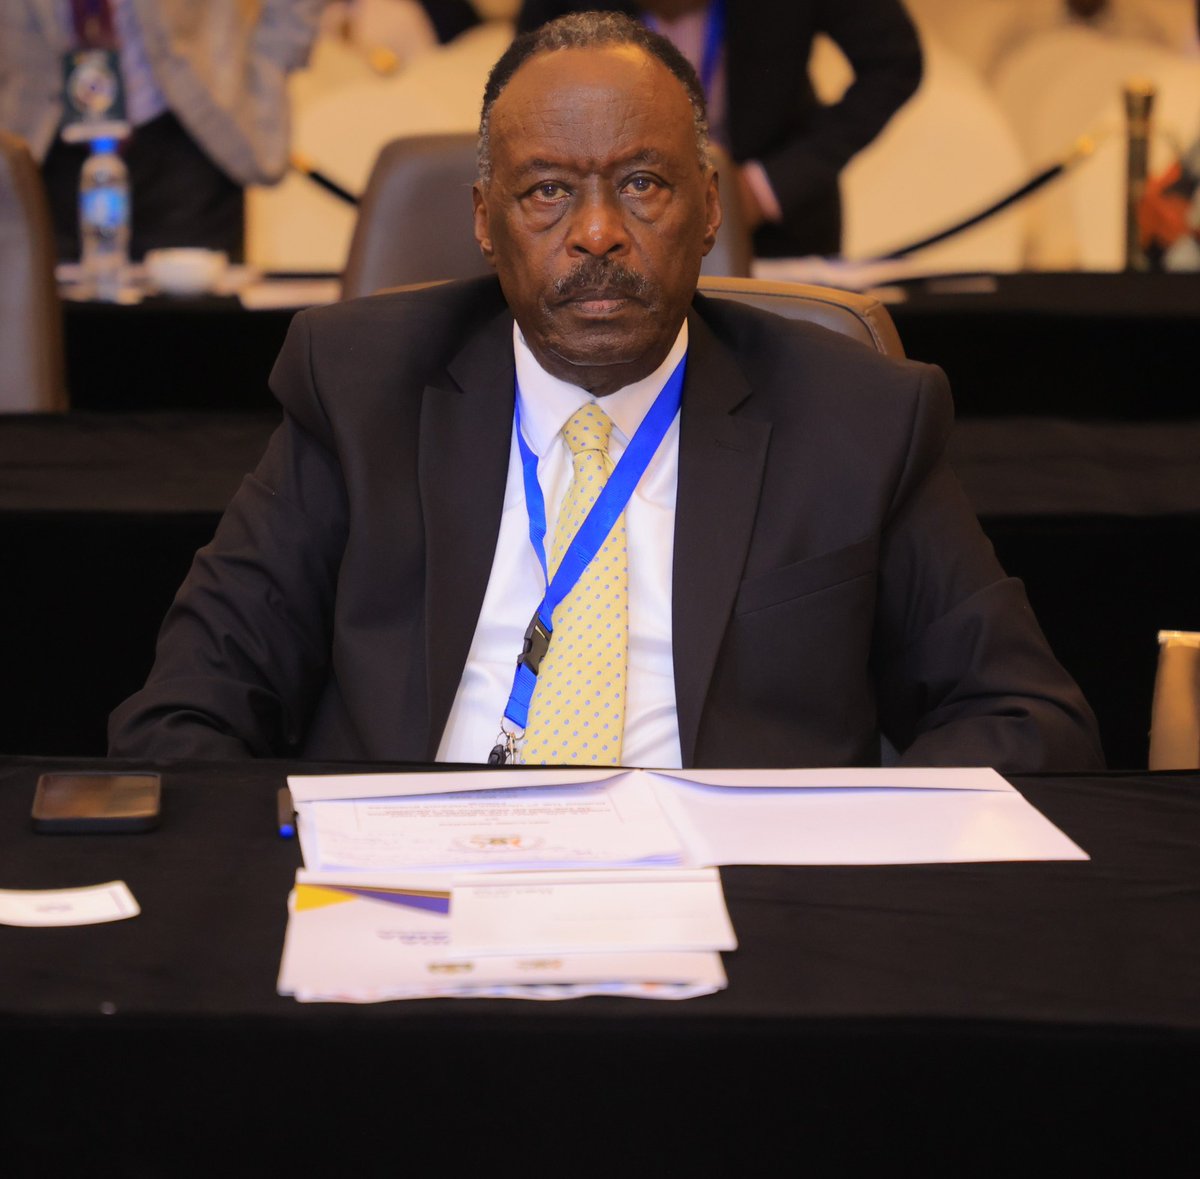 Uganda-Tanzania Business Forum kicks off at Johari Rotana Hotel in Dar es Salaam, Tanzania. The event, themed 'Enhancing our win-win bilateral partnership', aims to strengthen the longstanding ties between the two nations and foster economic cooperation.